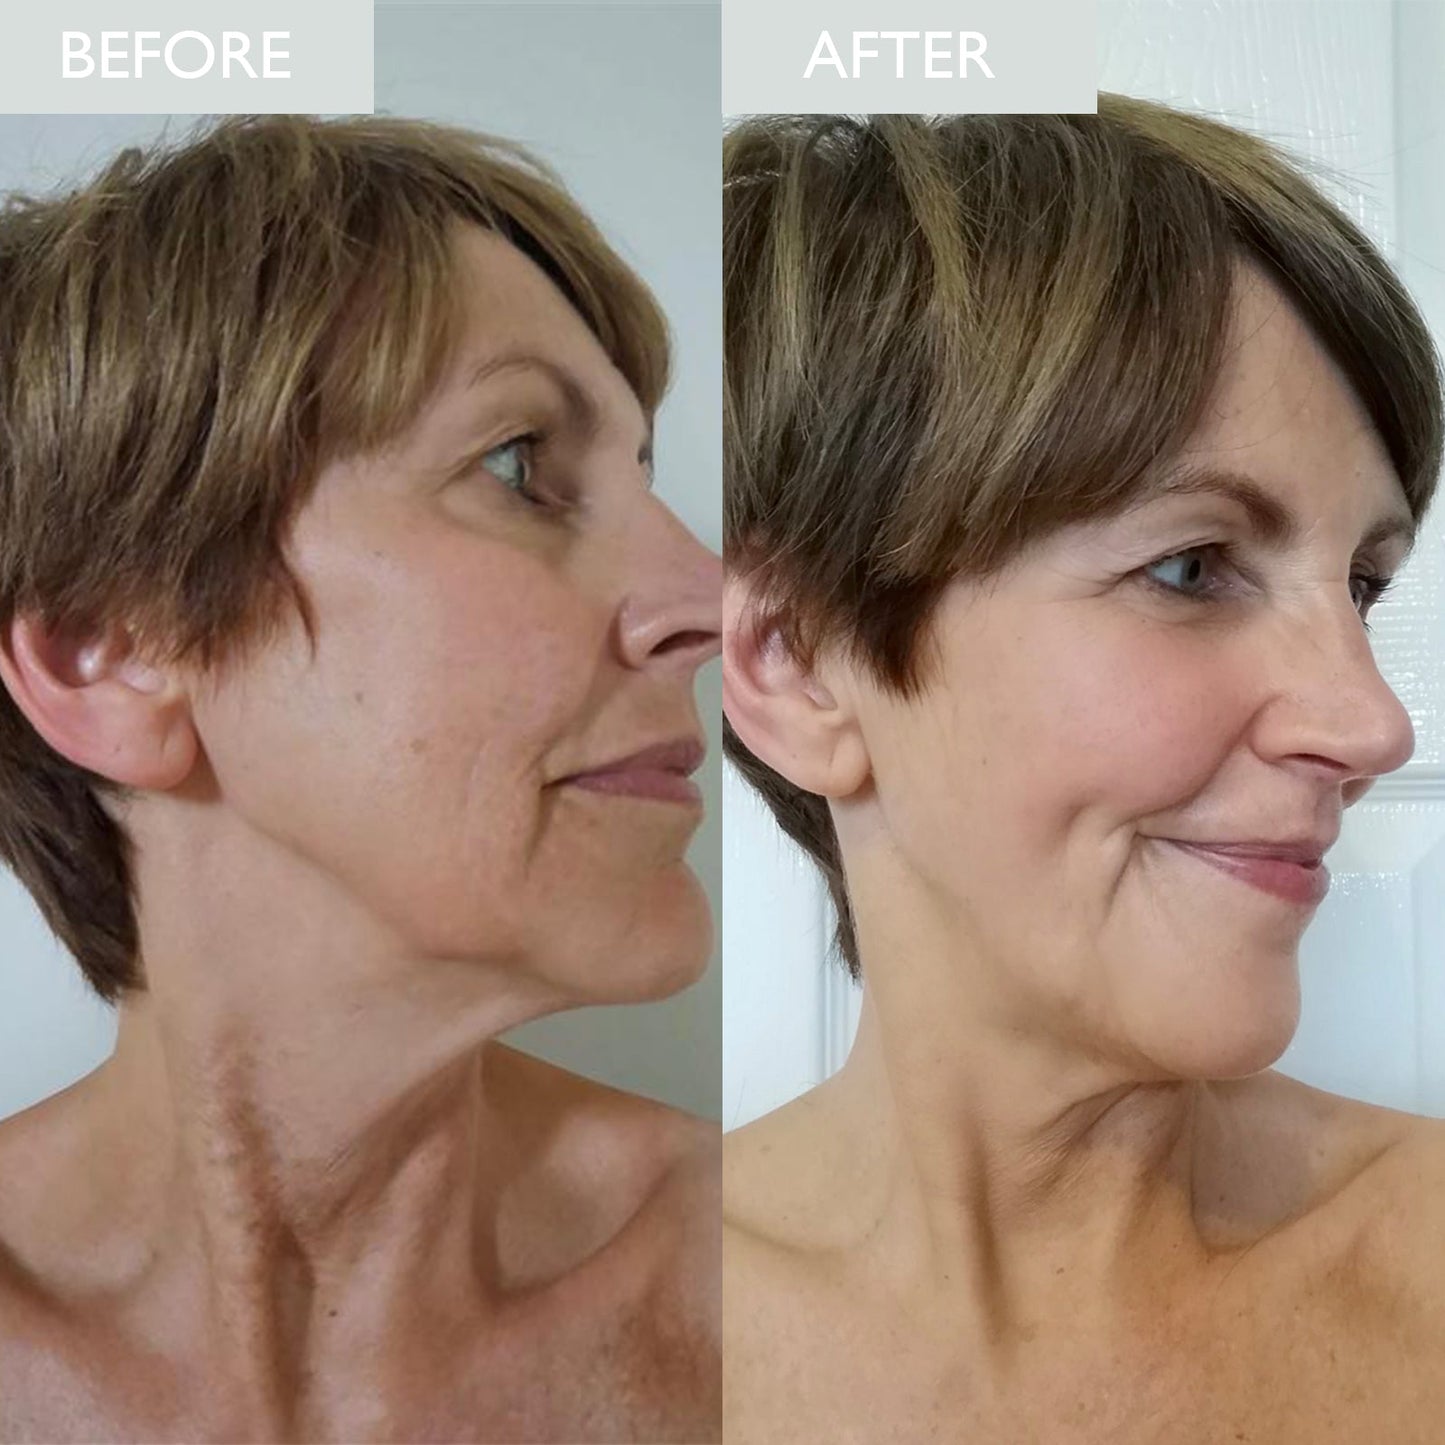 Before and after showing skin improvements in ageing and texture after using the anti-aging skincare kit.